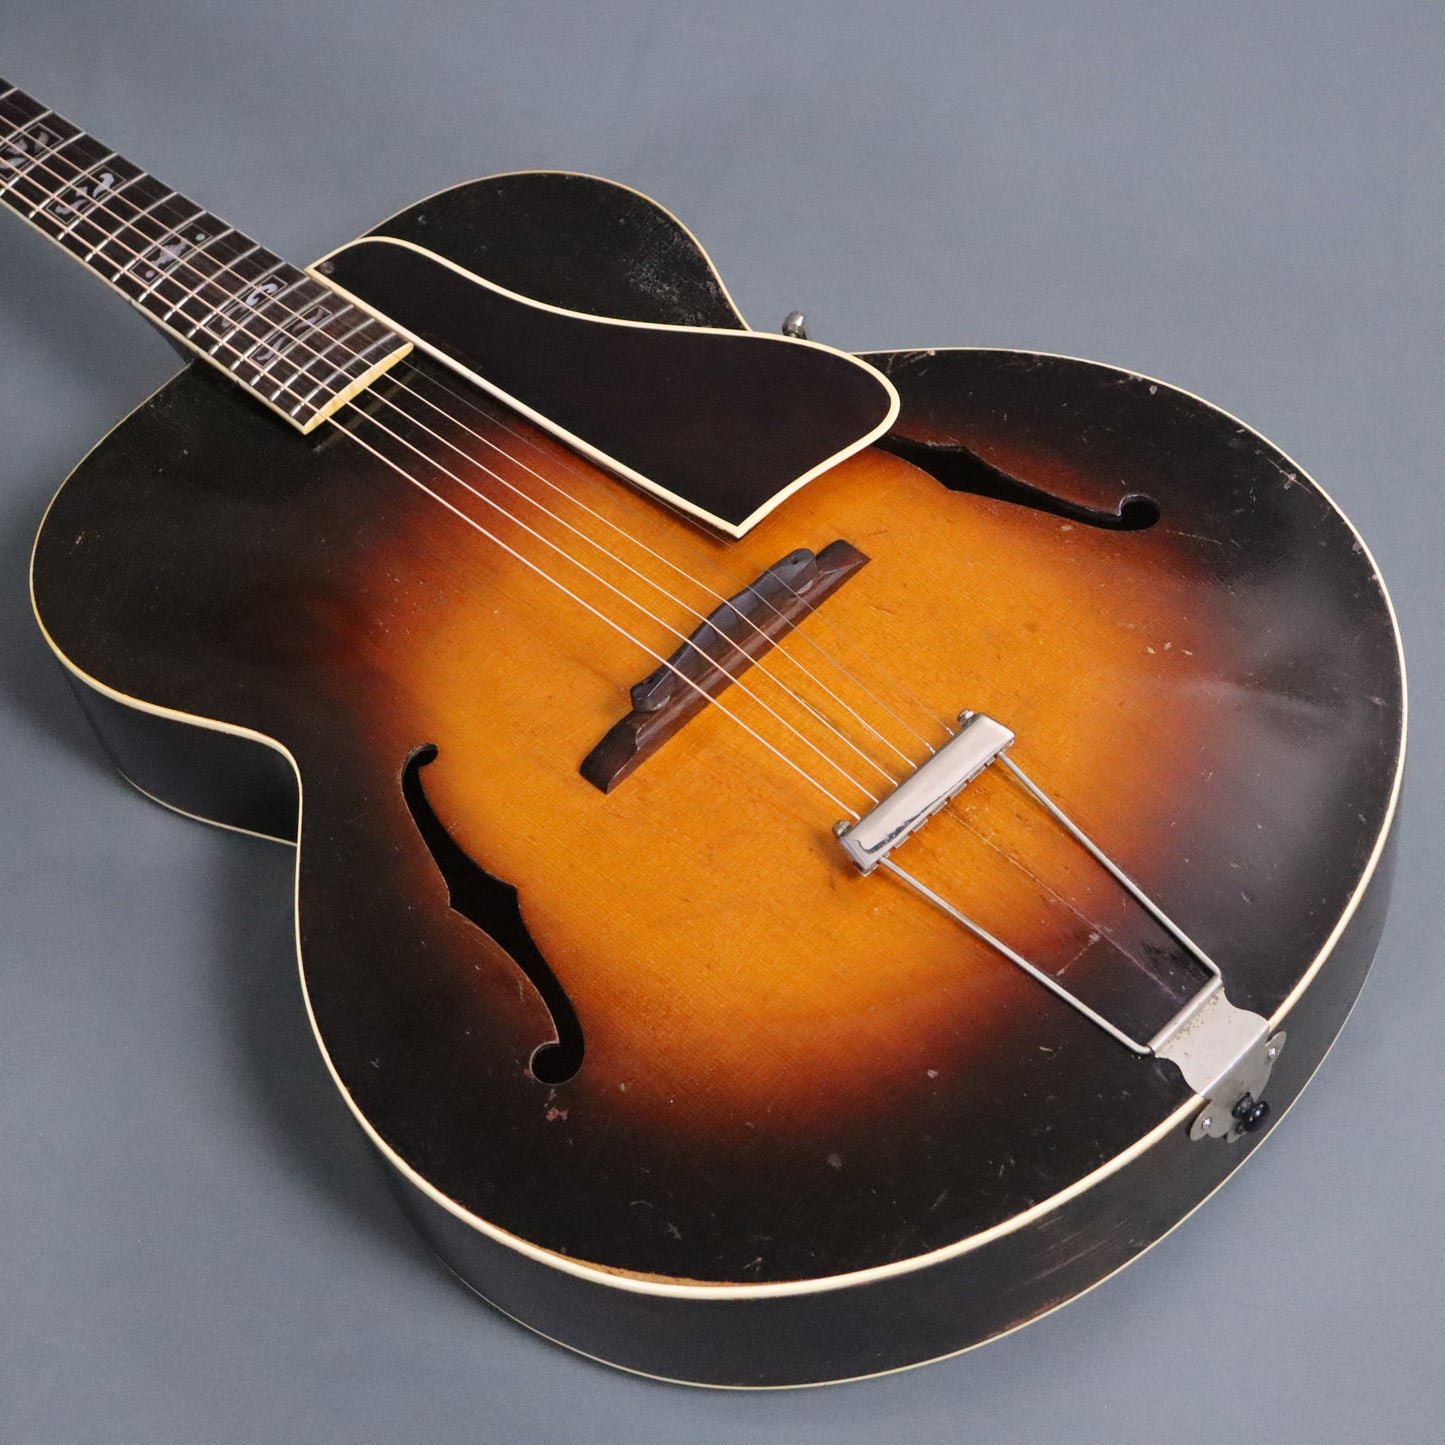 1936 Gibson L-7 Archtop Guitar w' FLAMED MAPLE L-5 Neck Advanced 17" Picture Frame L7 Arch Top